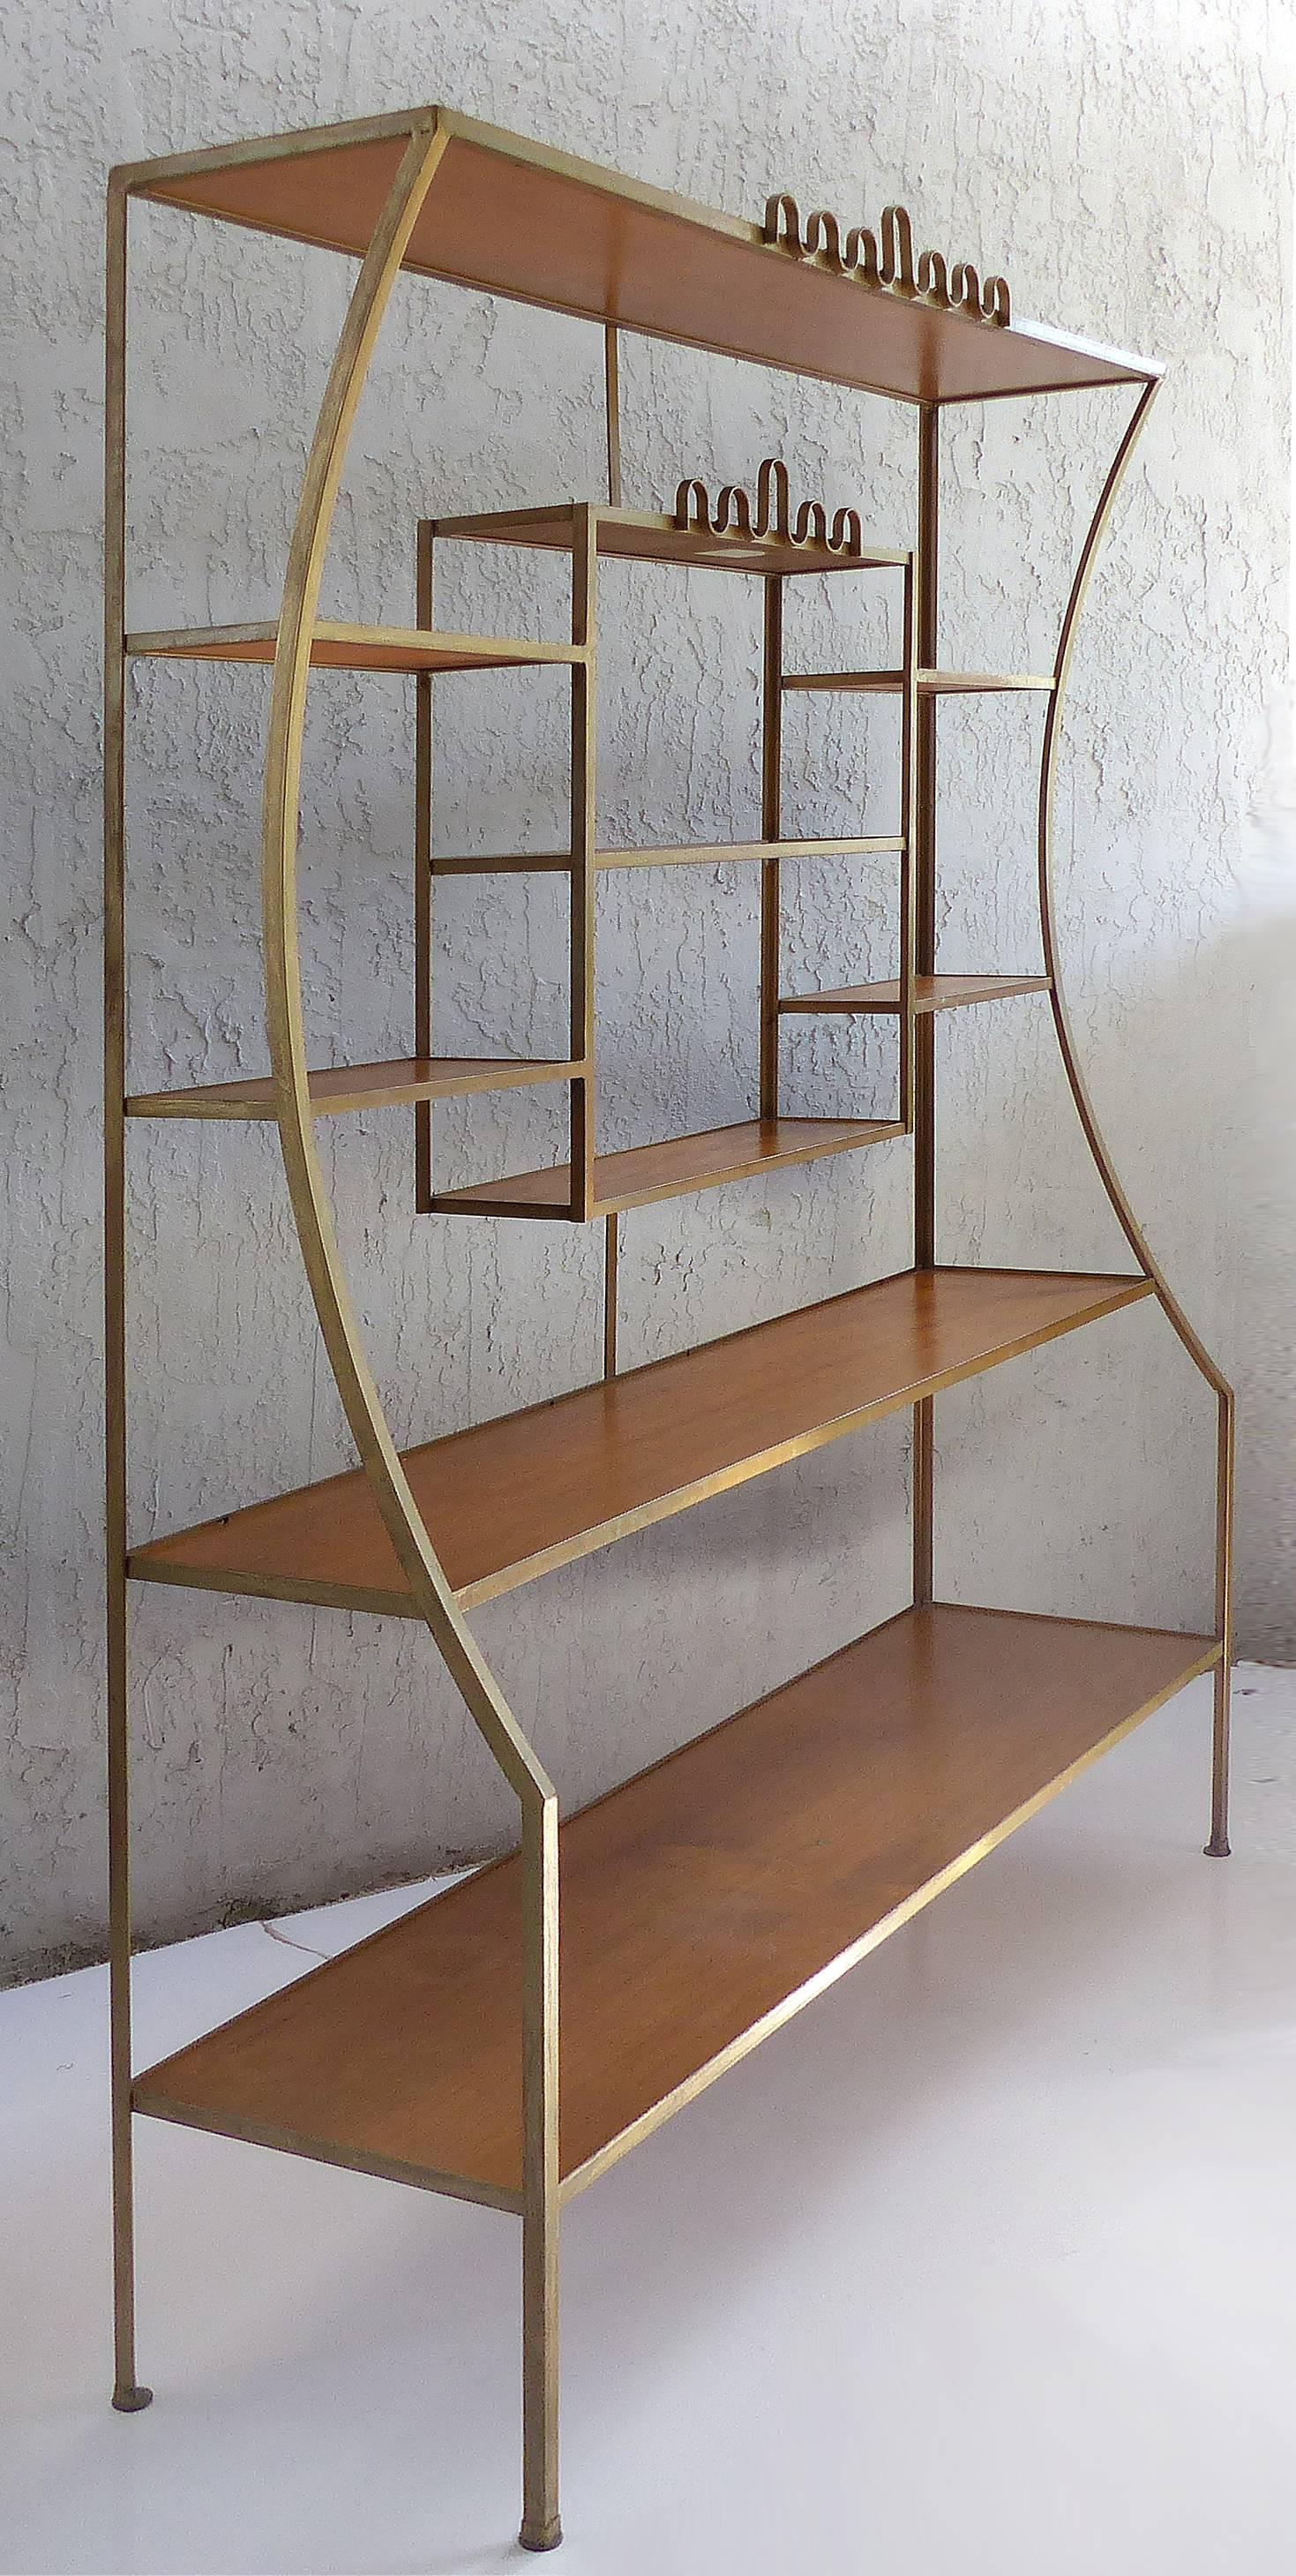 Offered for sale is an elegant Hollywood Regency gilt iron étagère attributed to Frederick Weinberg. The curved frame sides lead upward to a whimsical parapet detail. The frame supports two inset wood shelves, a shadow-box
with shelves and a